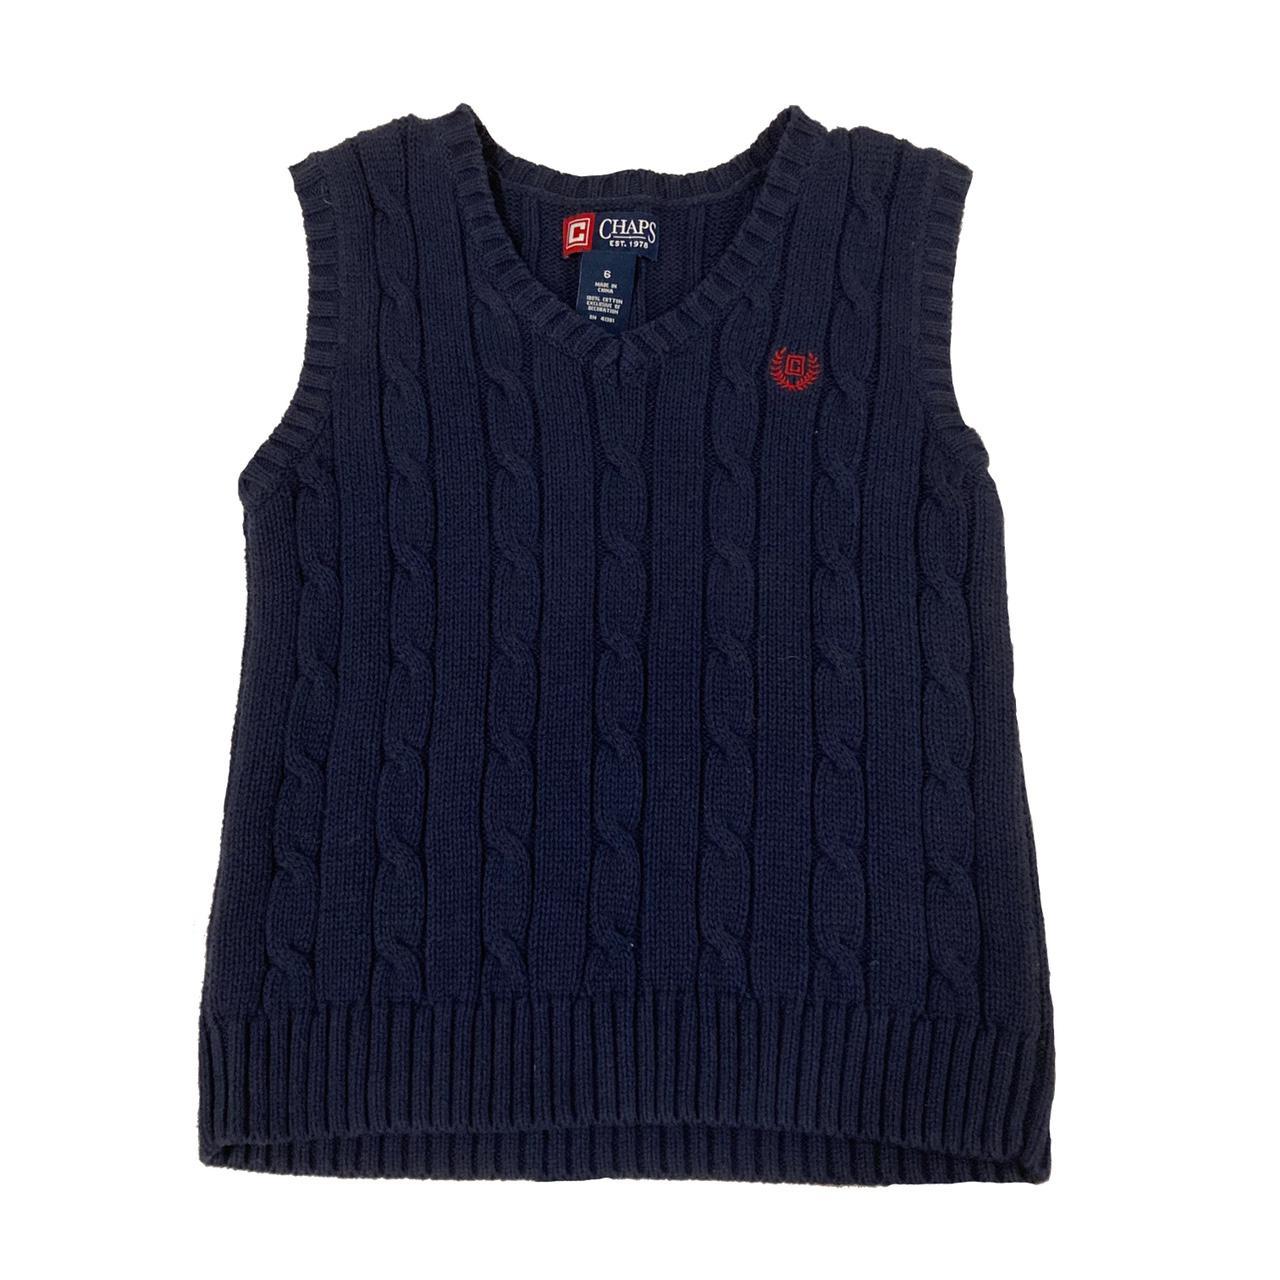 Chaps Women's Navy and Red Gilet